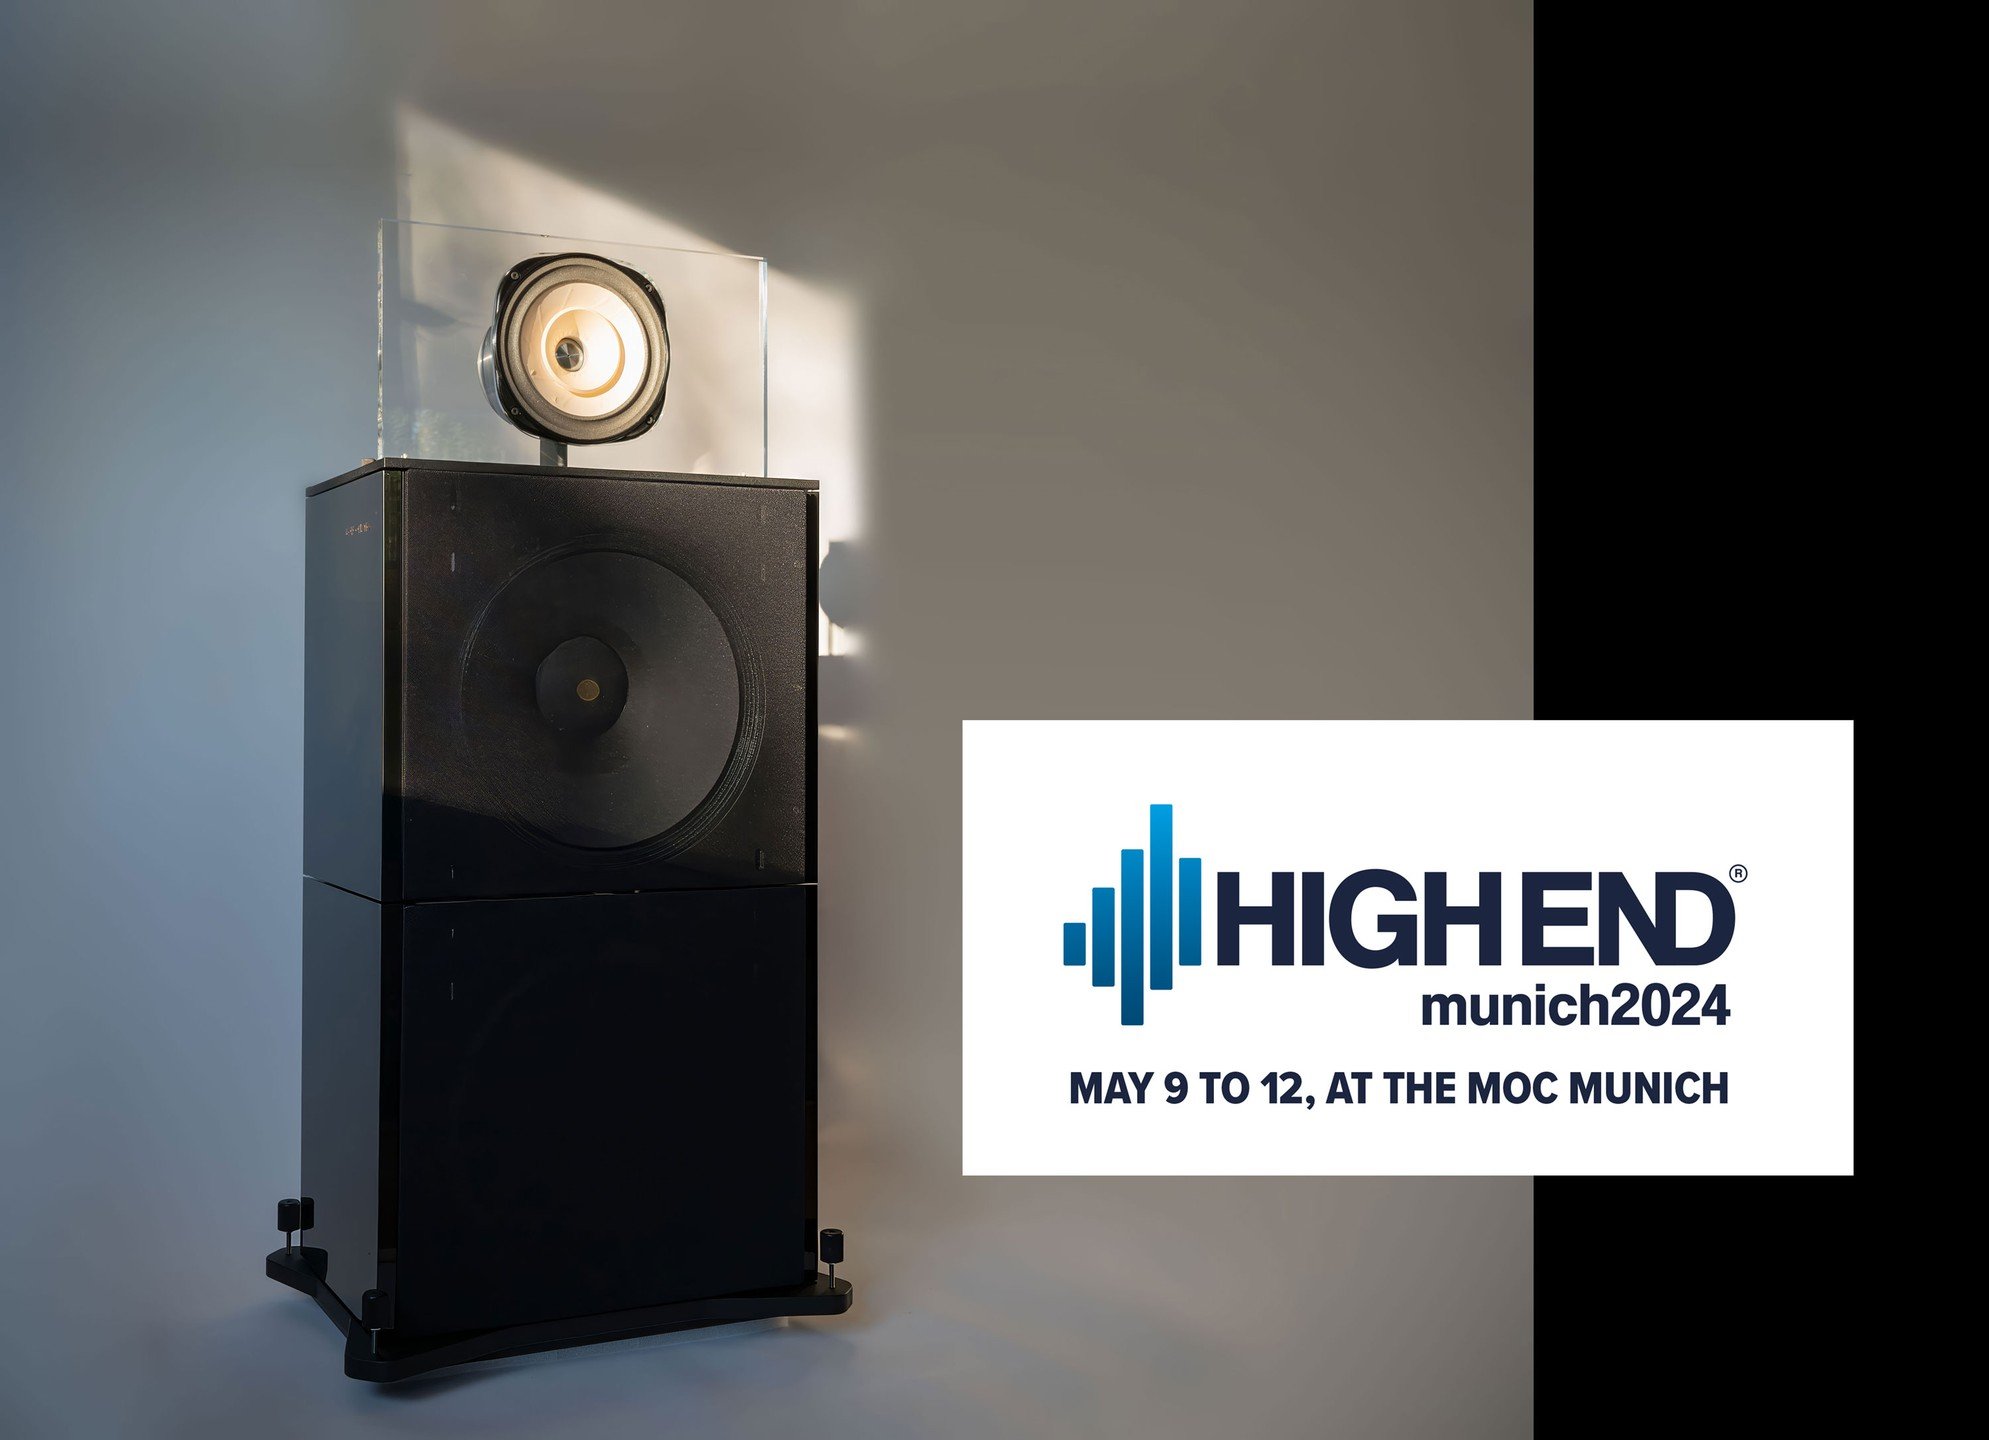 .
Experience the very best speakers

WVL 23216 LONDON / WVL 12739 ULTIMA
Mehr Lautsprecher braucht kein Mensch

For those who are only satisfied with the very best we have pulled out all the stops and present modern field coil and crossover technolog